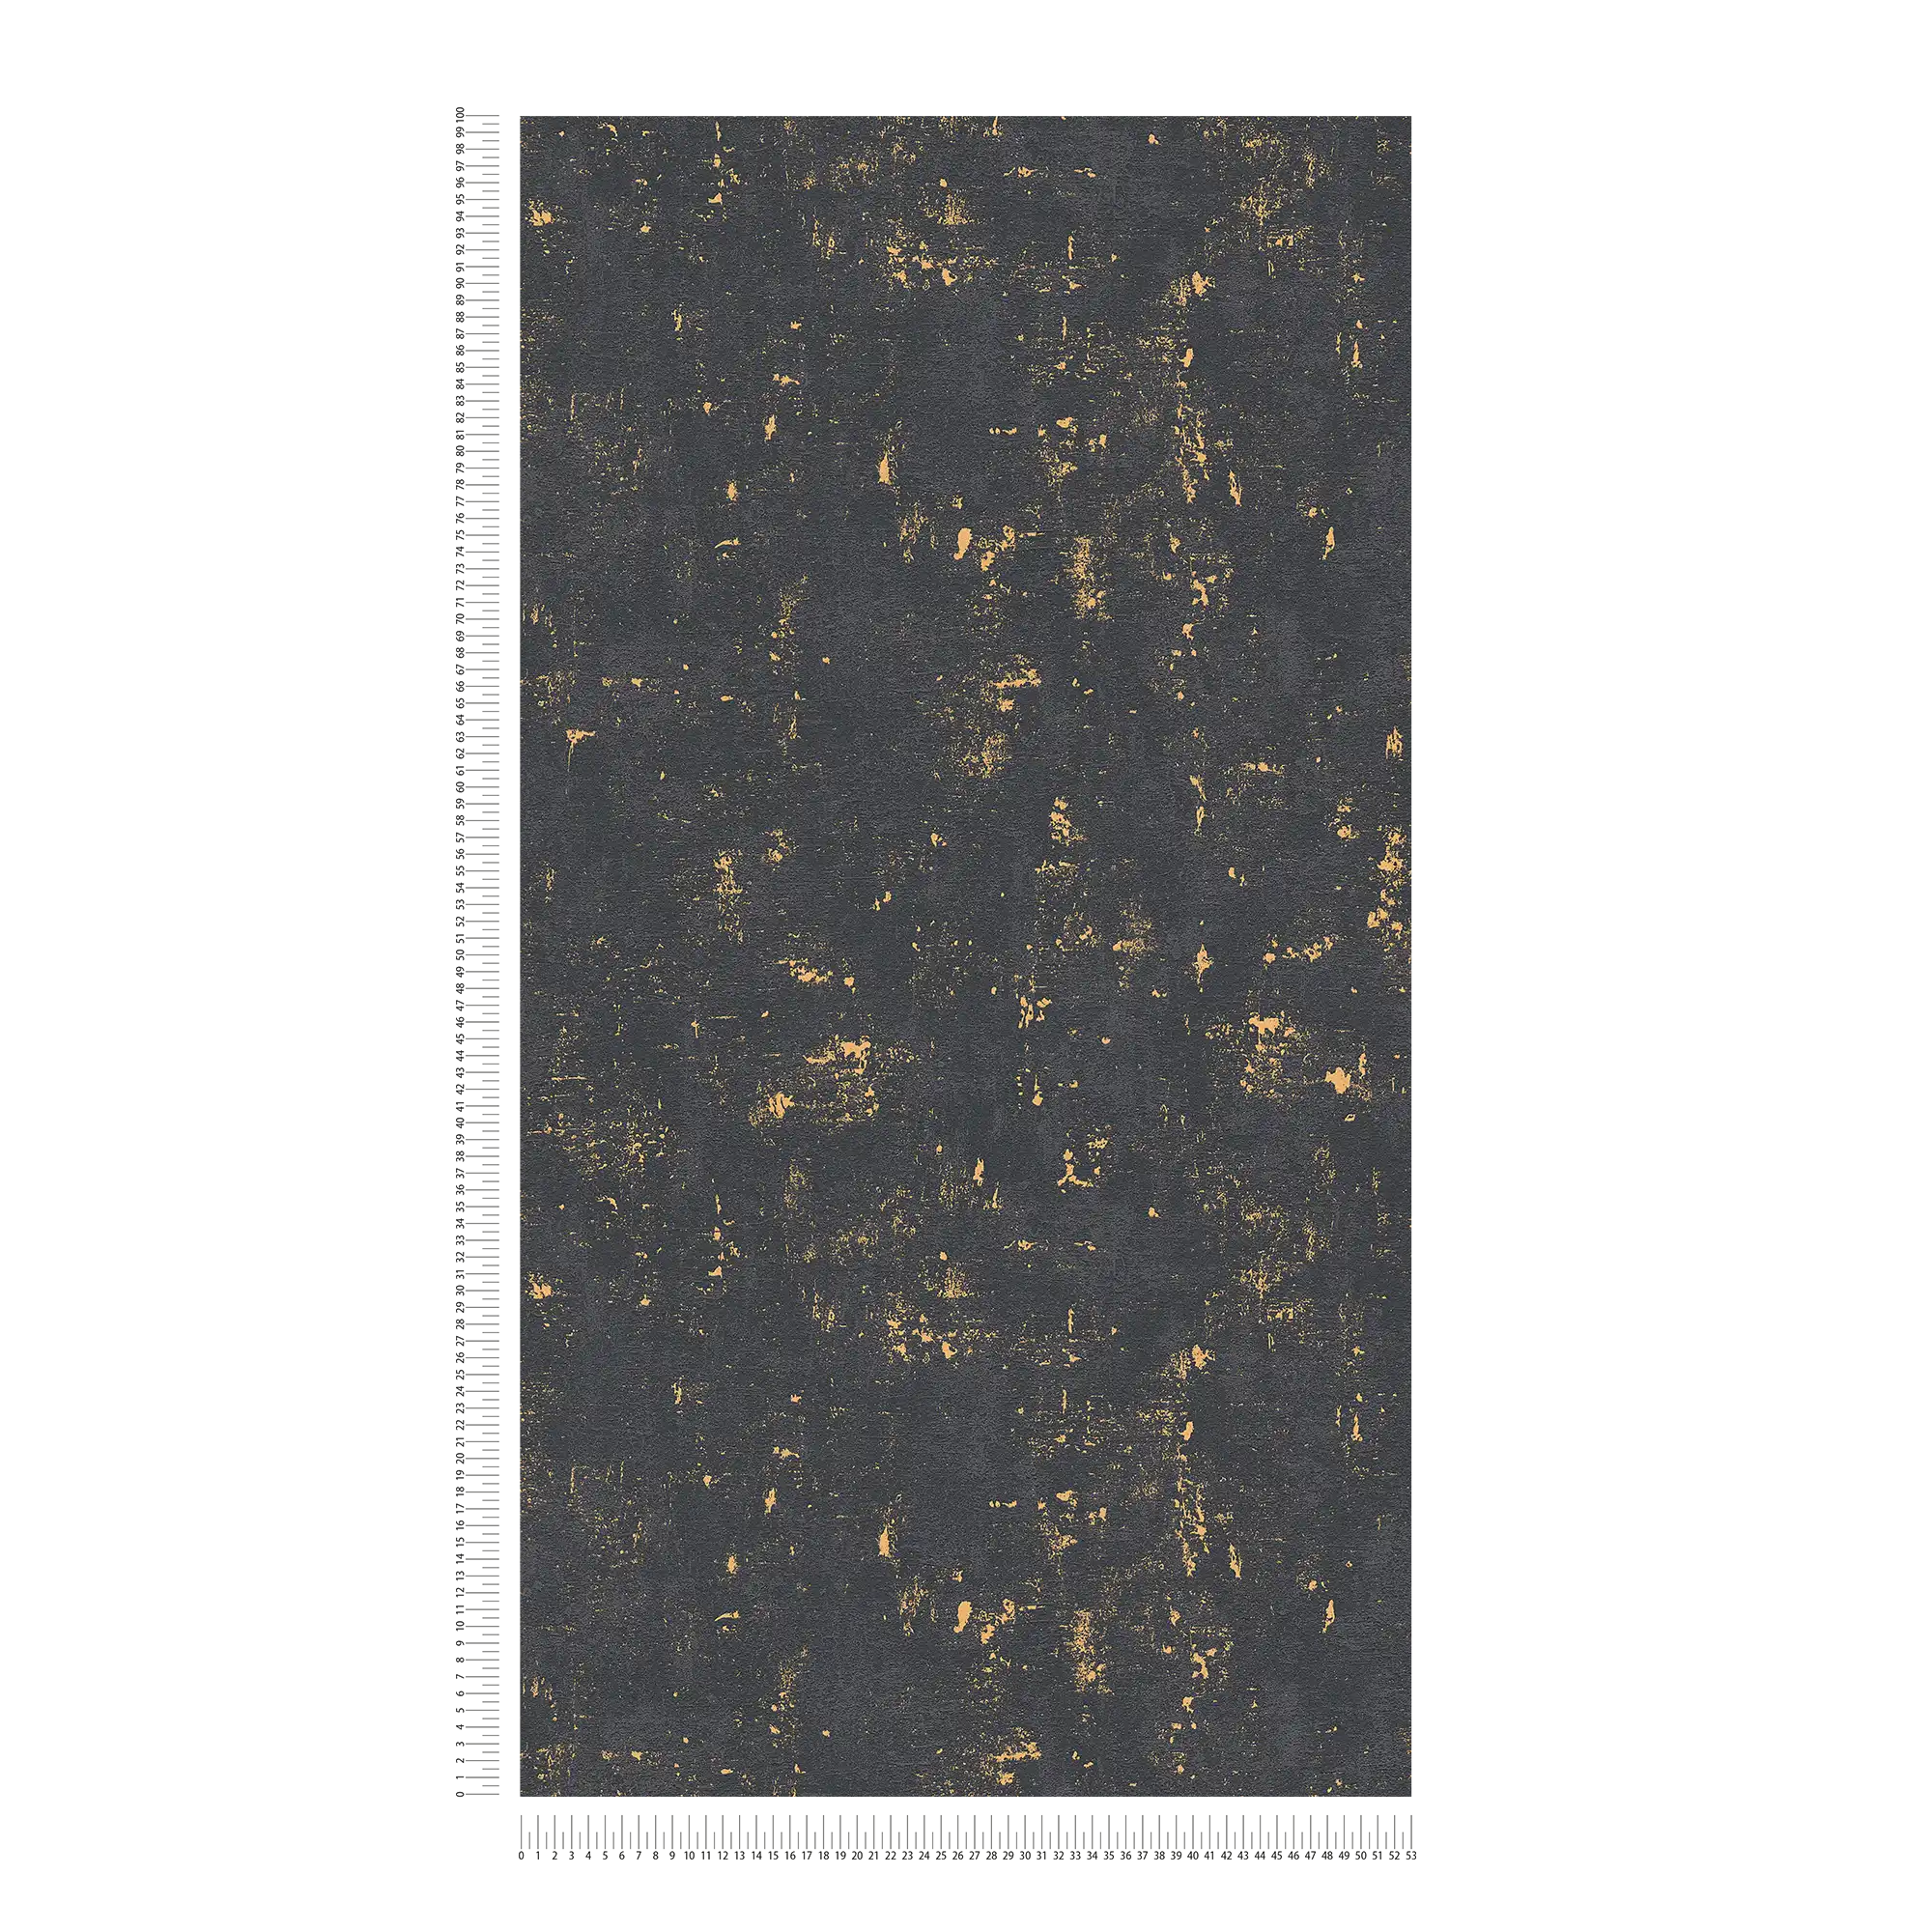             Used look wallpaper with metallic effect - black, gold
        